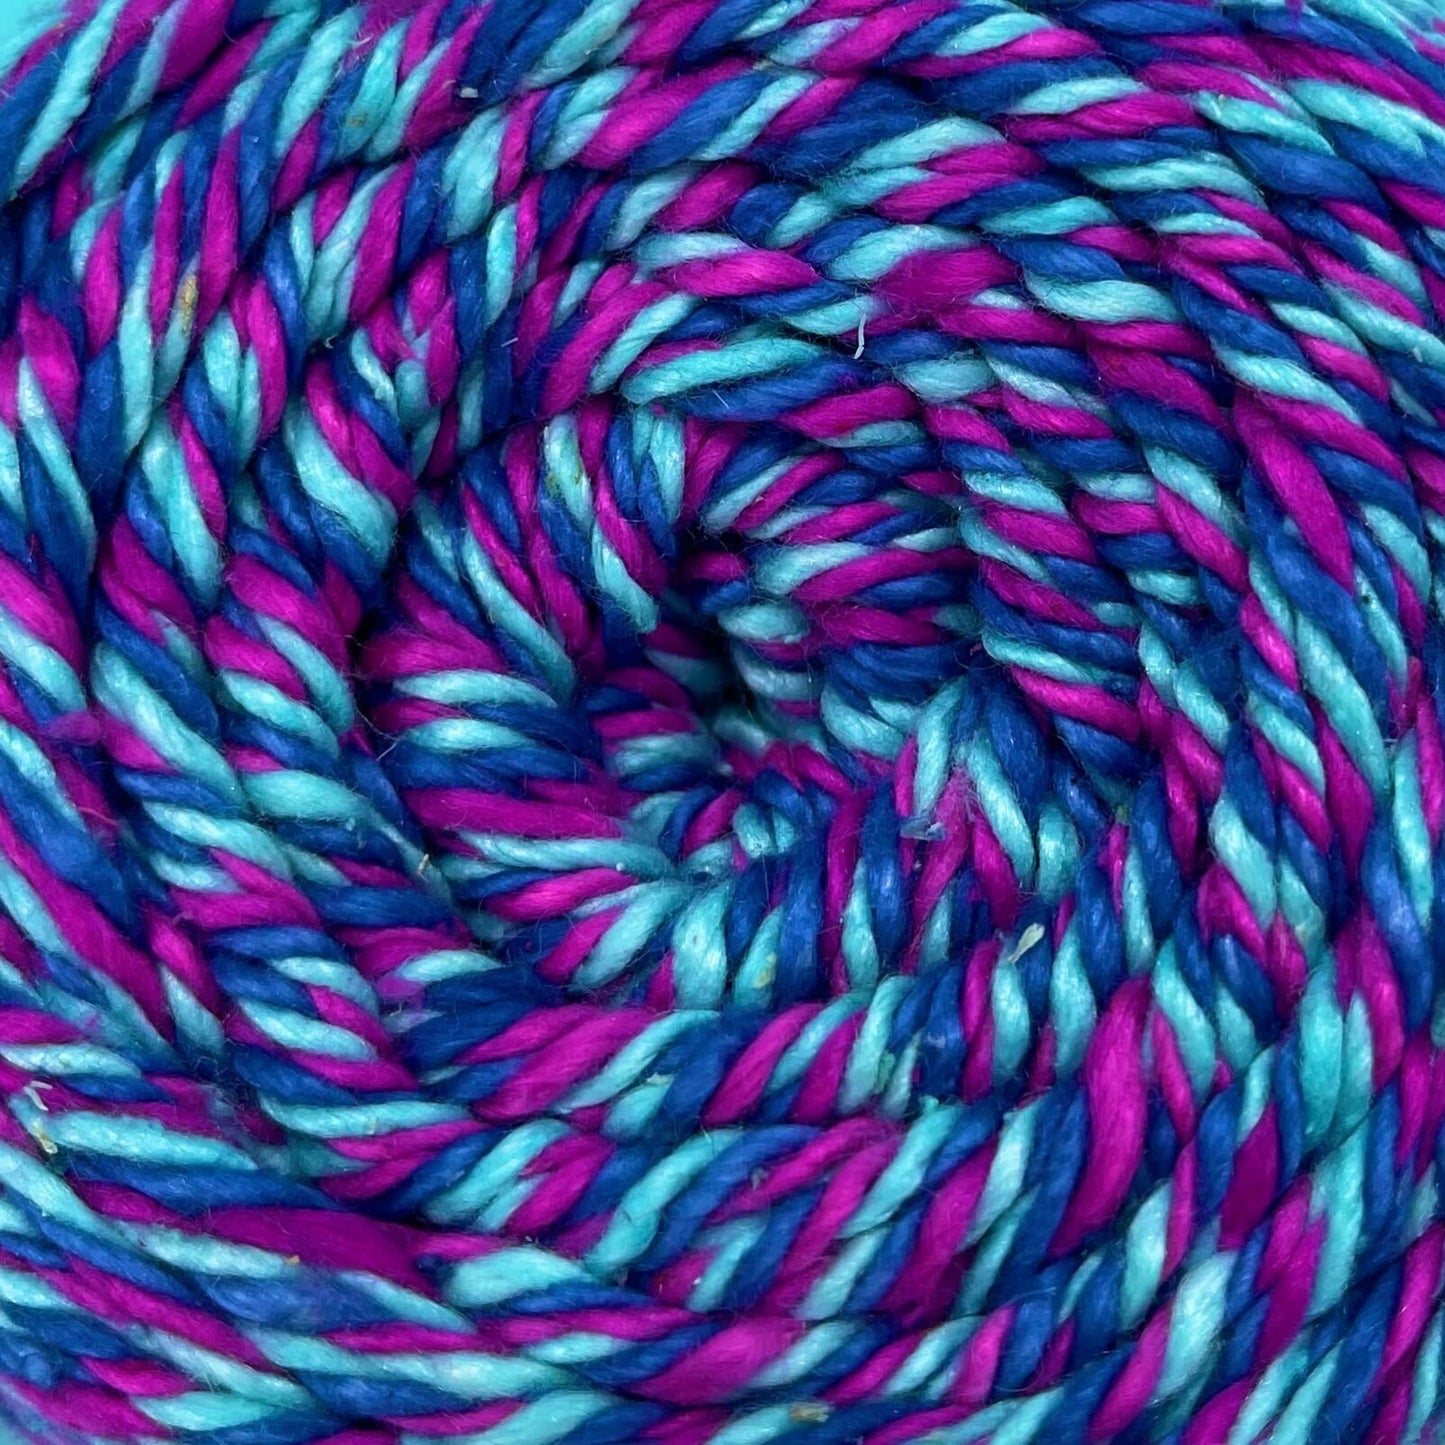 A close up of a skein of reclaimed silk yarn on a white background. The yarn is a triple ply yarn with pink, turquoise and navy colors.